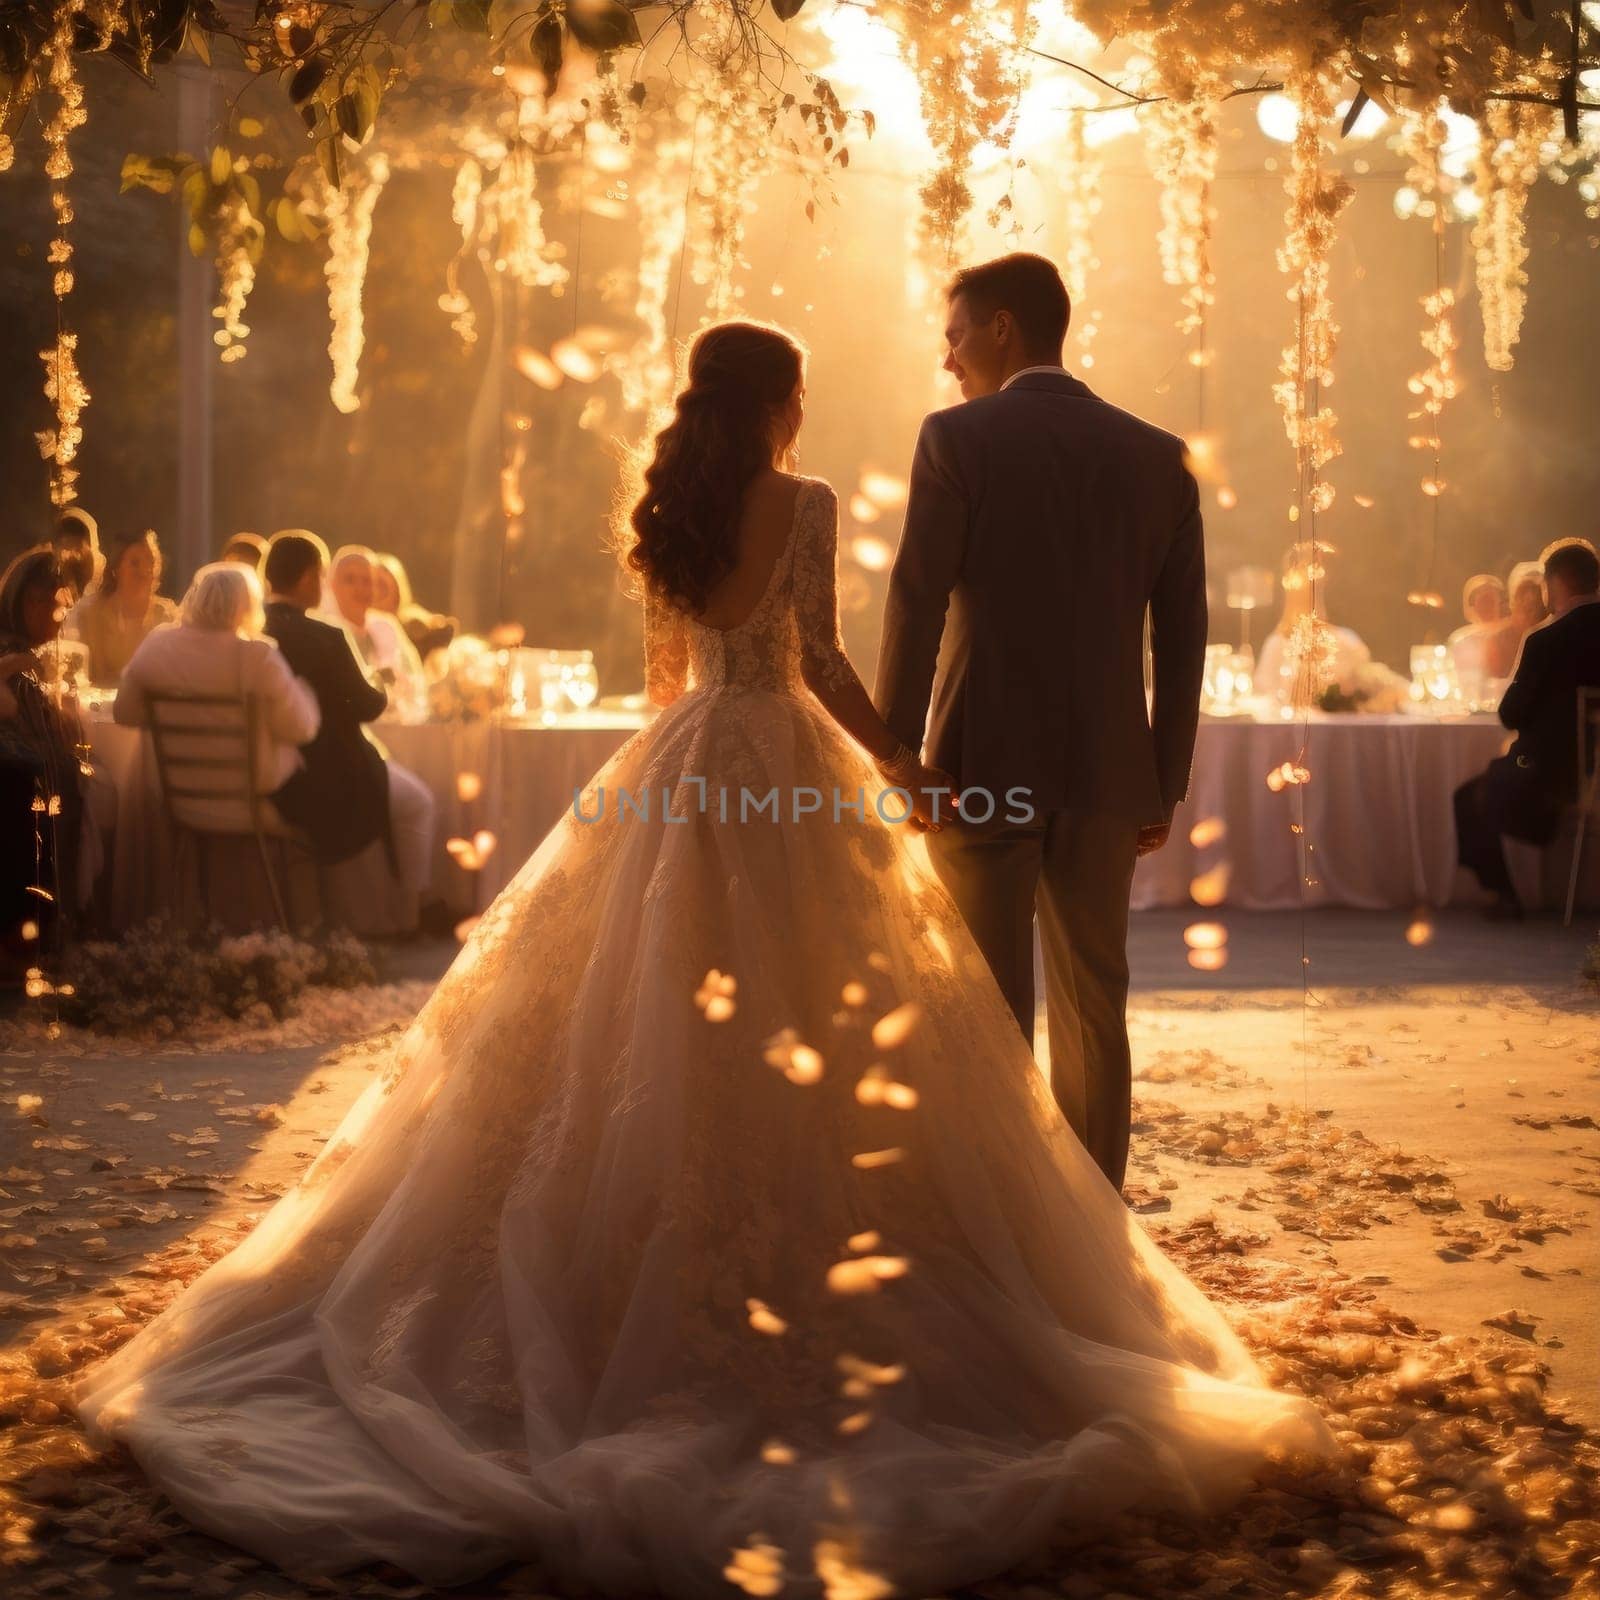 The bride and groom at the perfect wedding by cherezoff